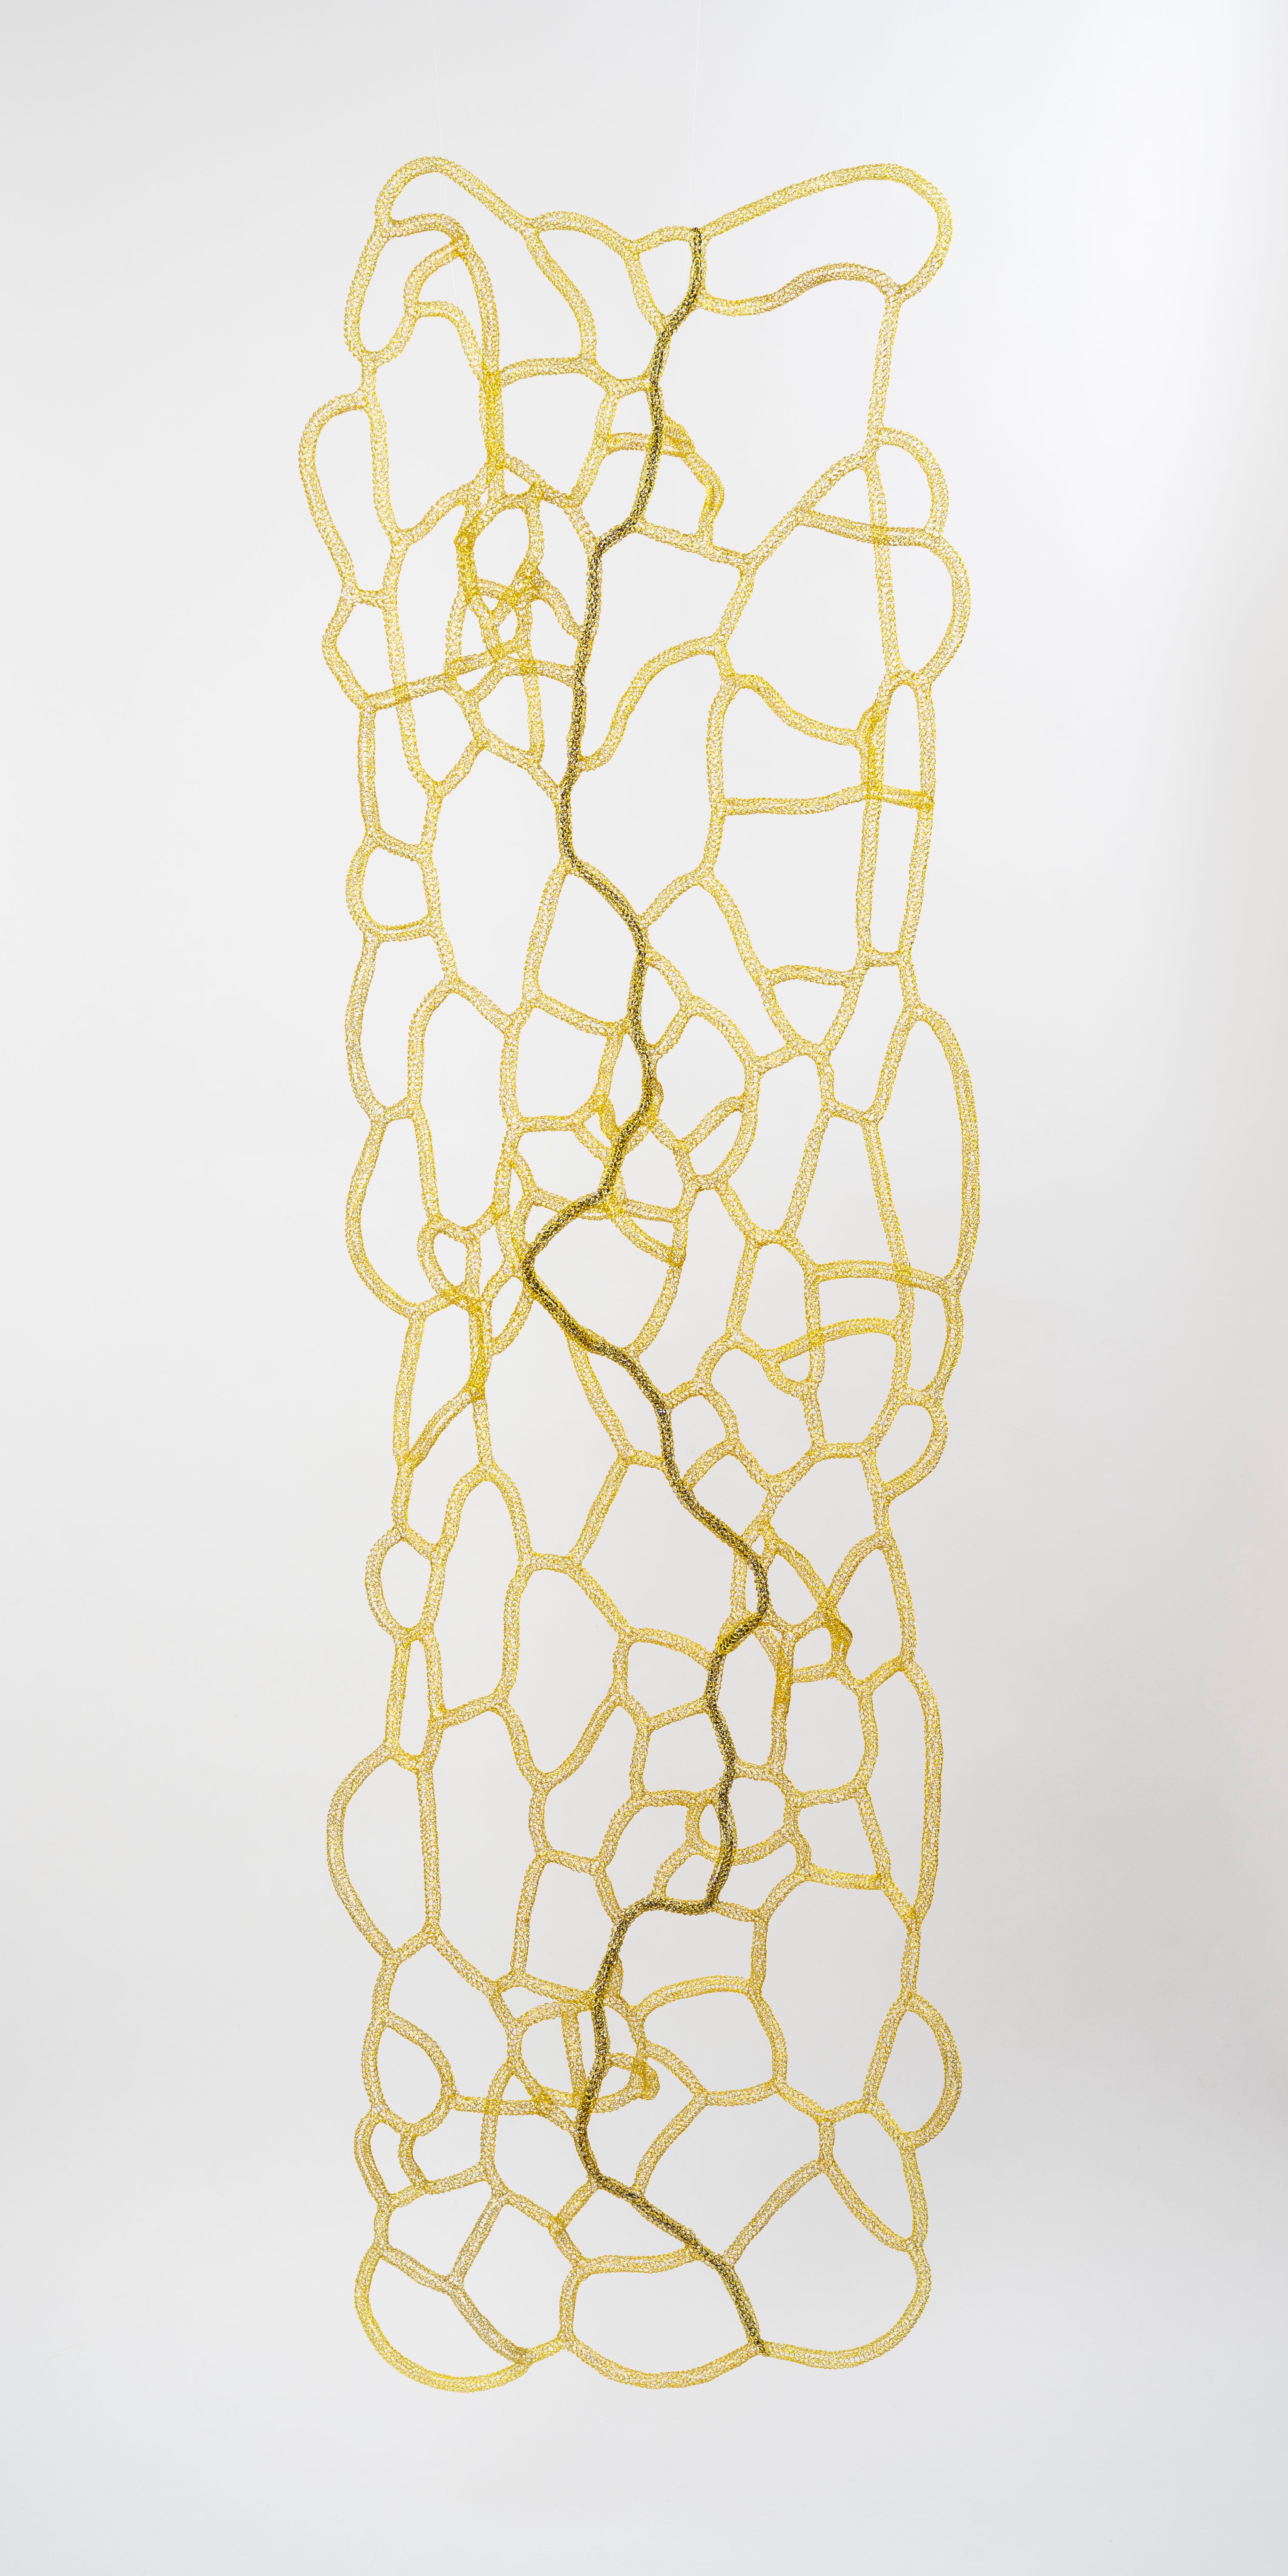 Delphine Grandvaux Abstract Sculpture - "The Path (La Sente)", Yellow and Black Metal Aerial Hand-Woven Mural Sculpture 